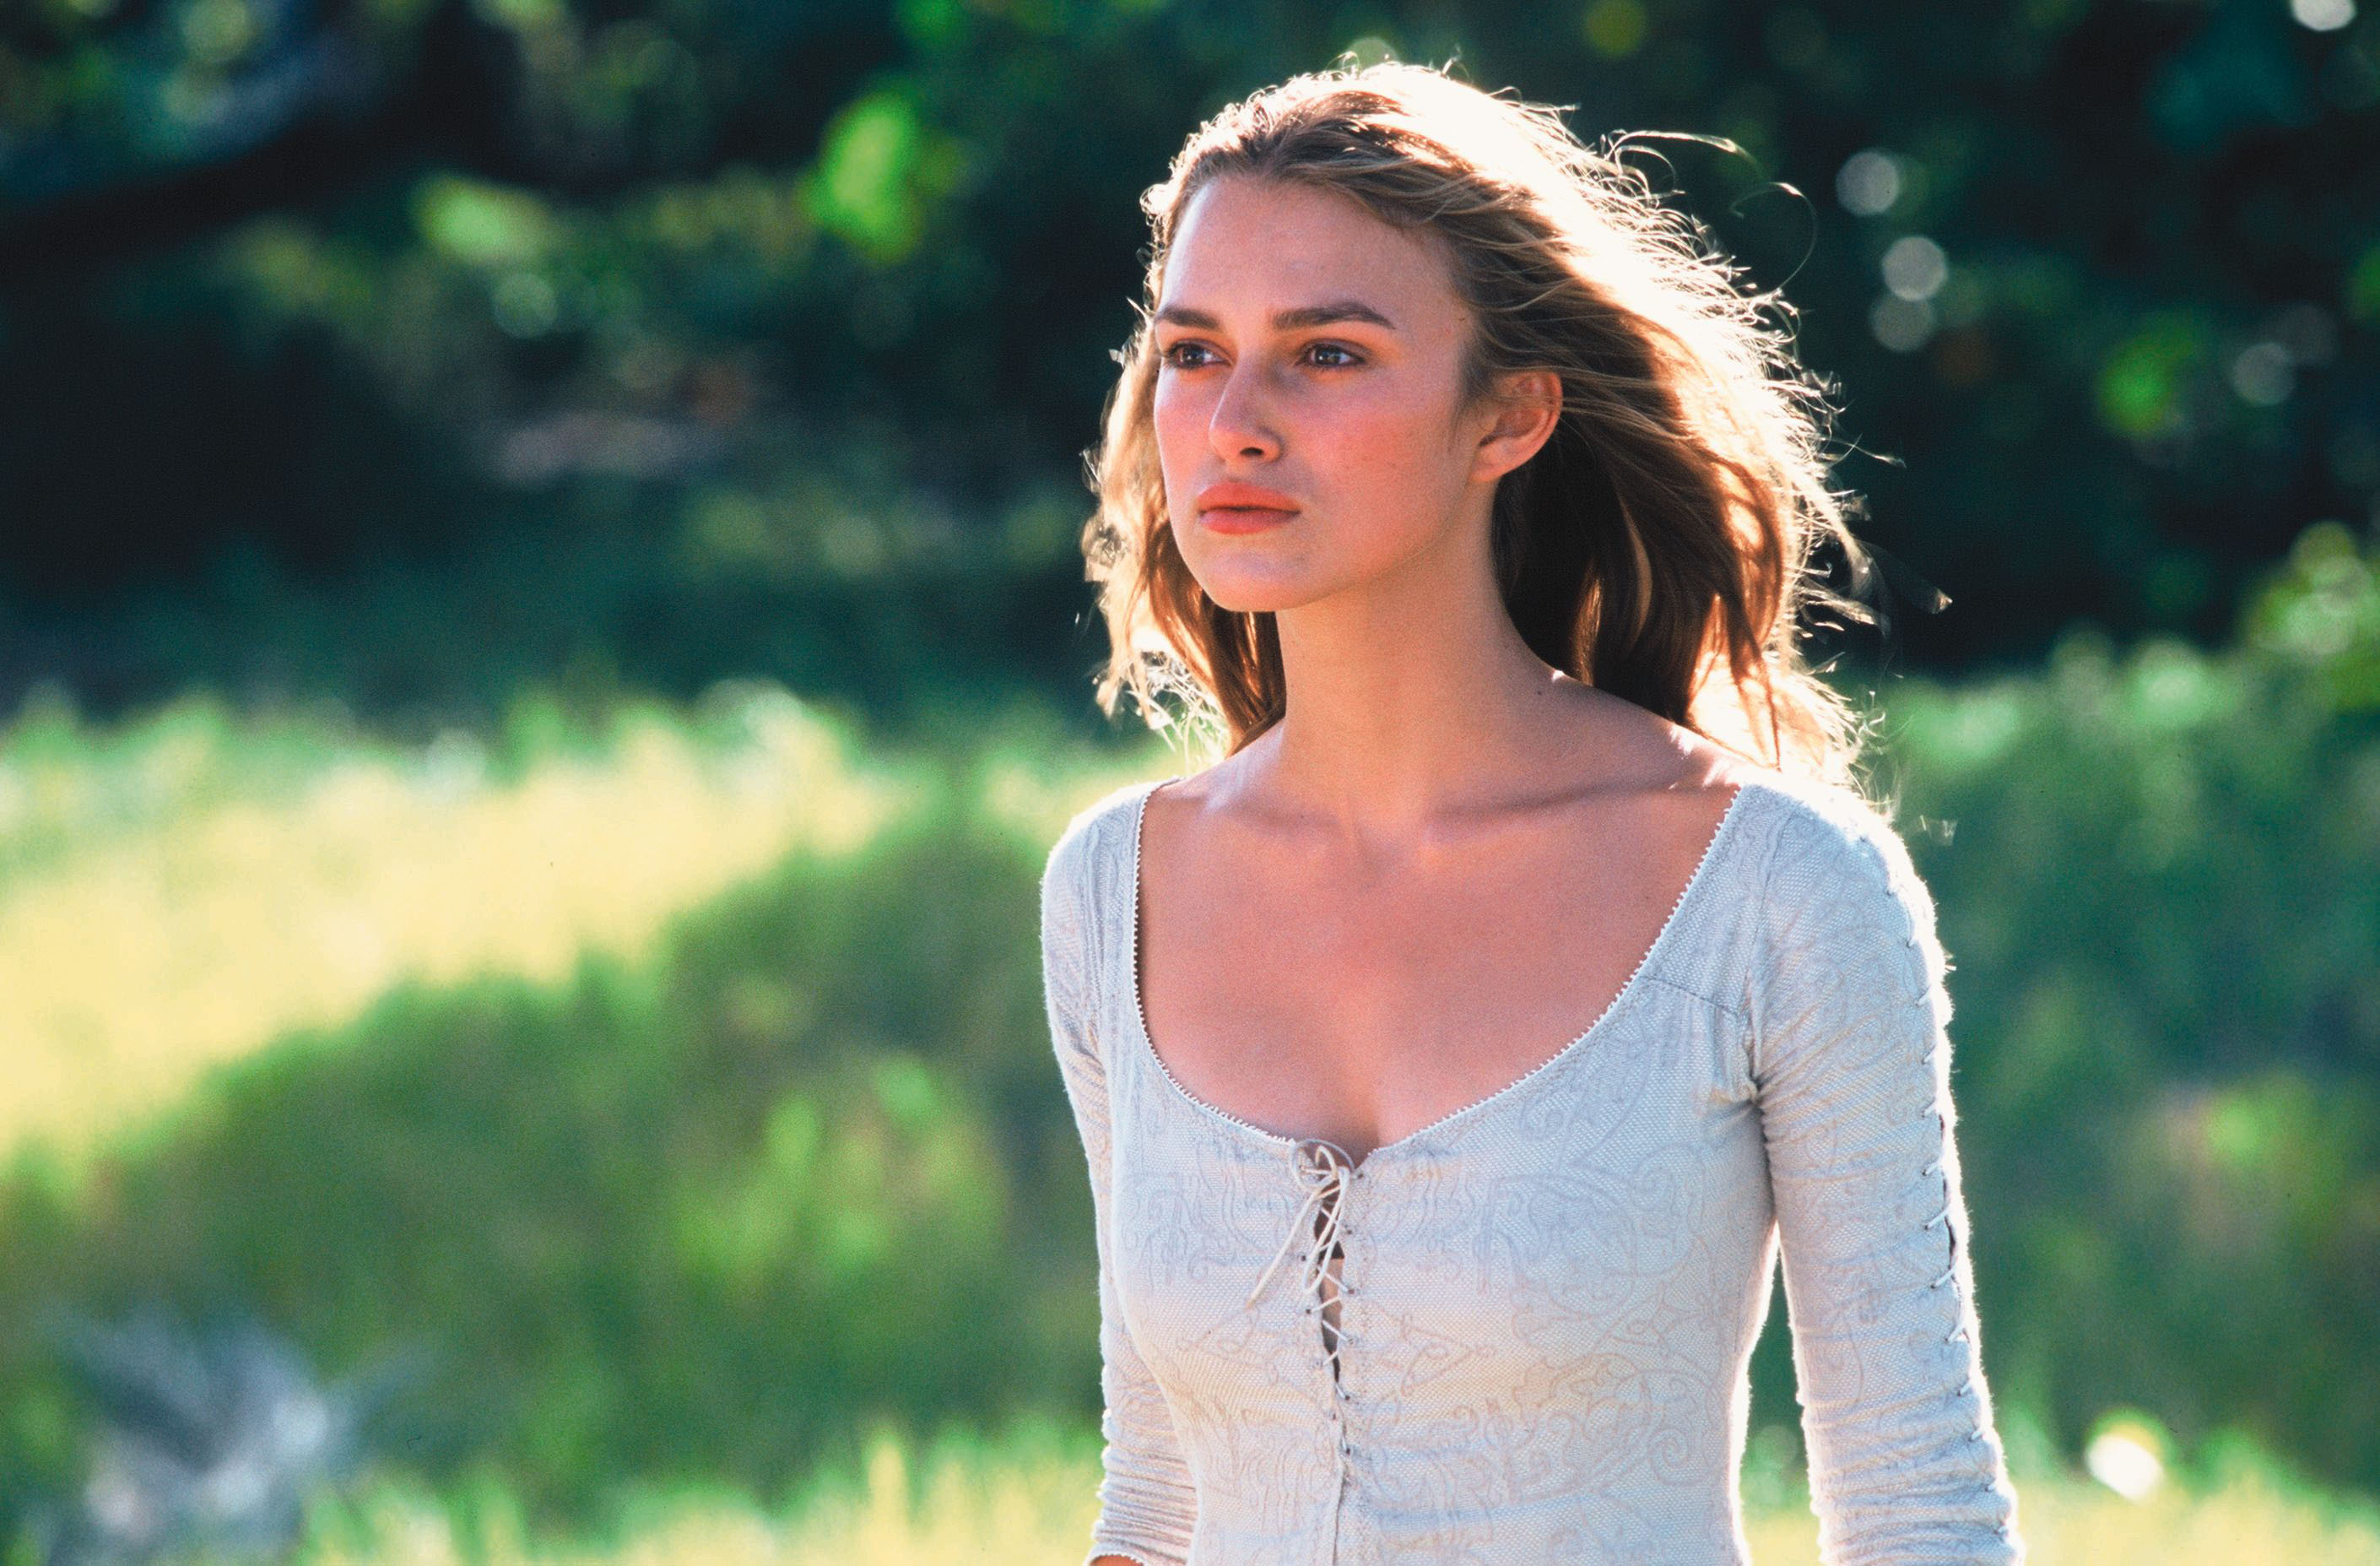 keira knightley, elizabeth swann, movie, pirates of the caribbean: the curse of the black pearl, pirates of the caribbean